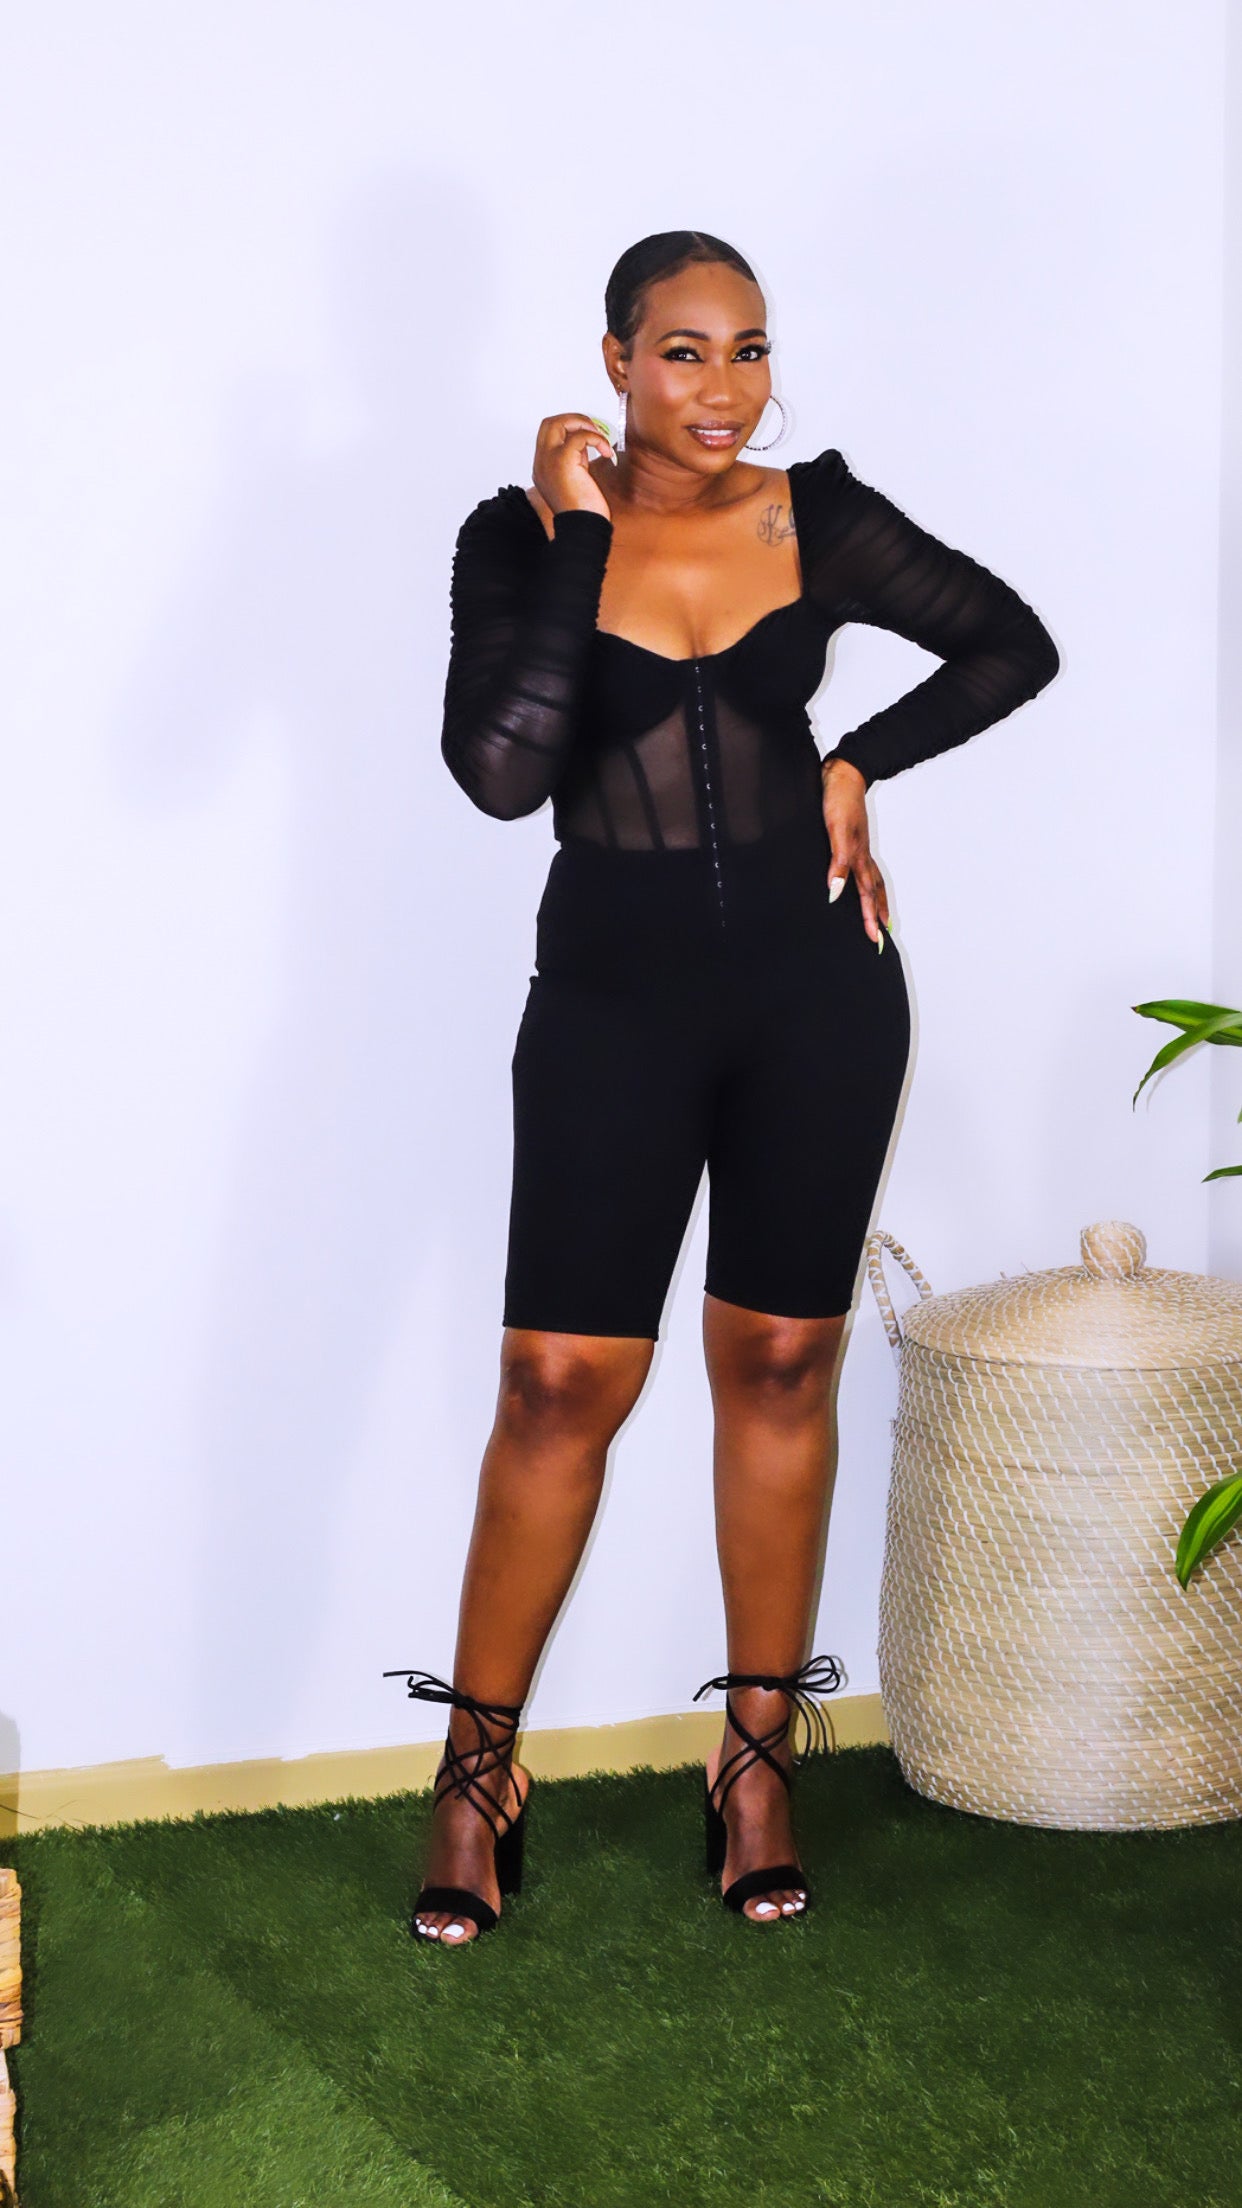 Illusion Romper is sheer with long sleeves on top with a legging style bottom. Front has a hooked closure with sweetheart neckline. Illusion has amazing stretch and is a definitely a showstopper. 